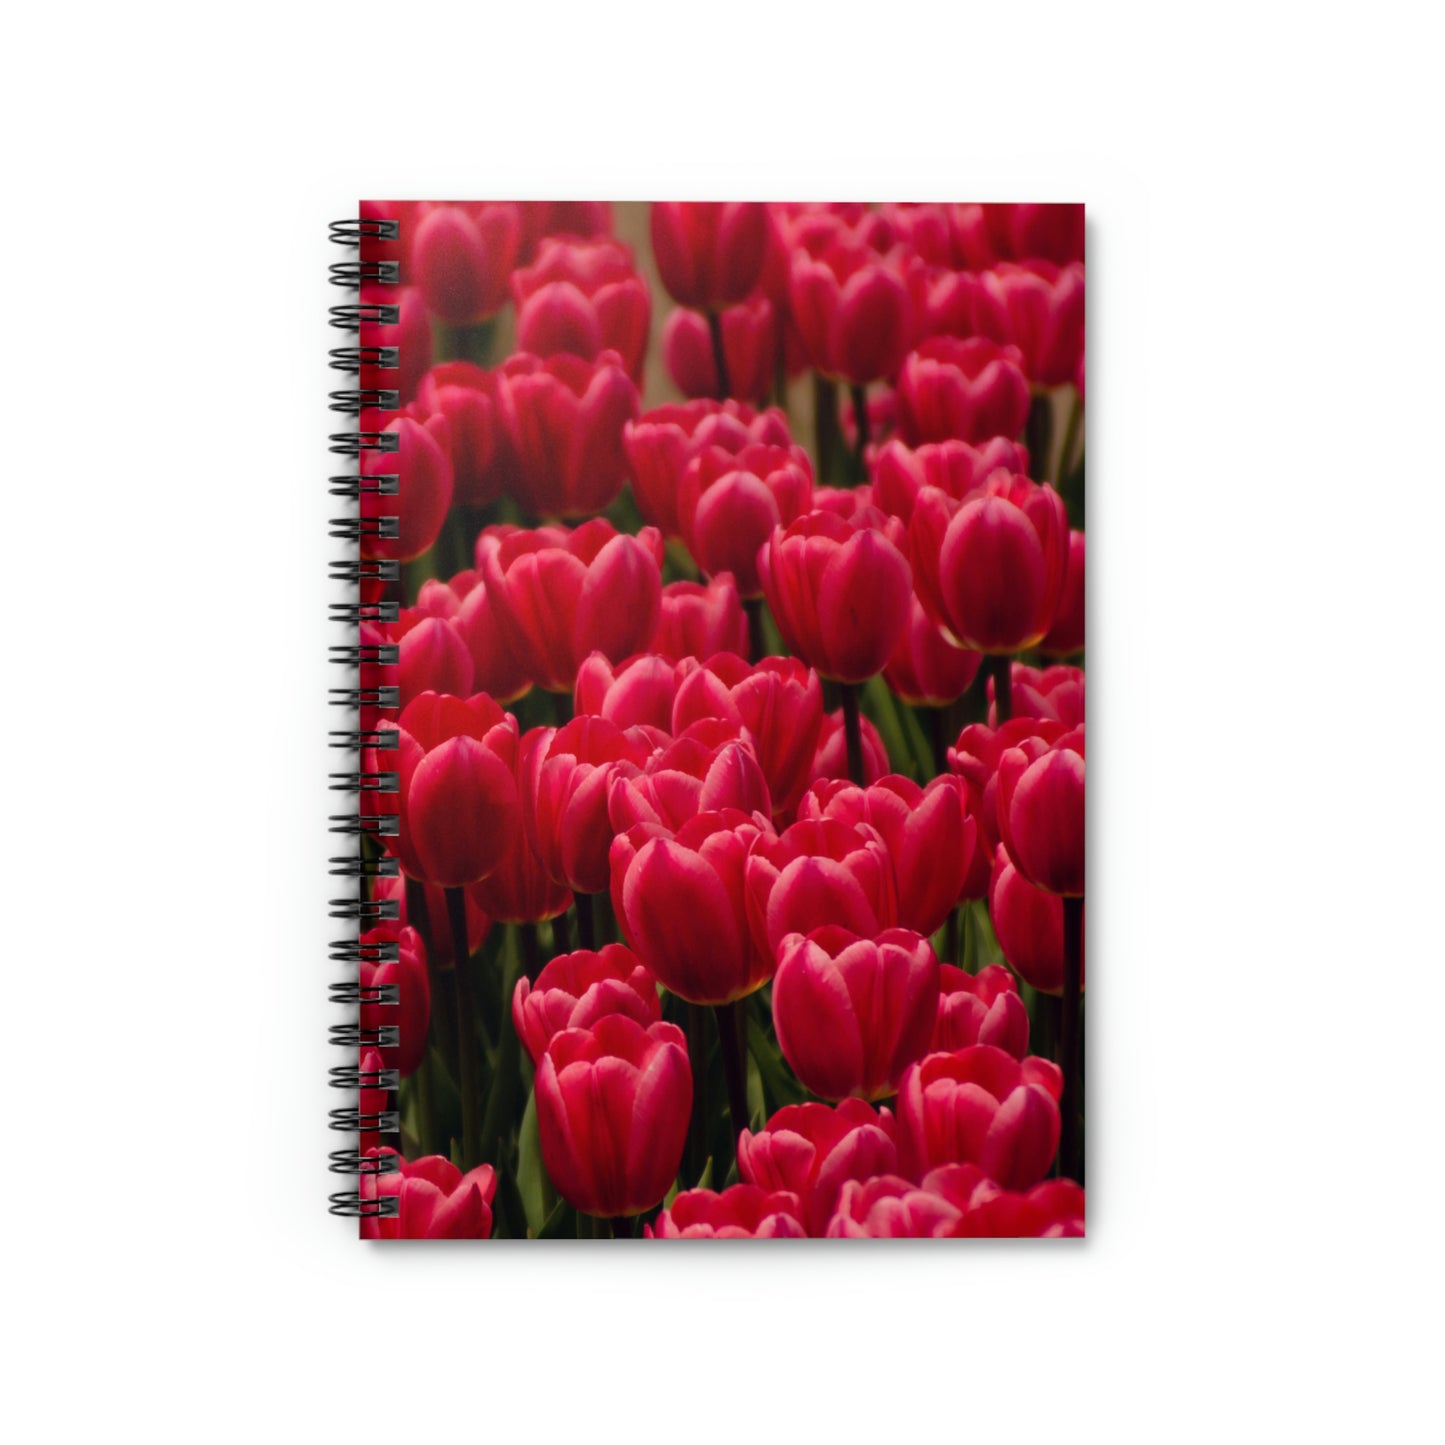 Flowers 15 Spiral Notebook - Ruled Line